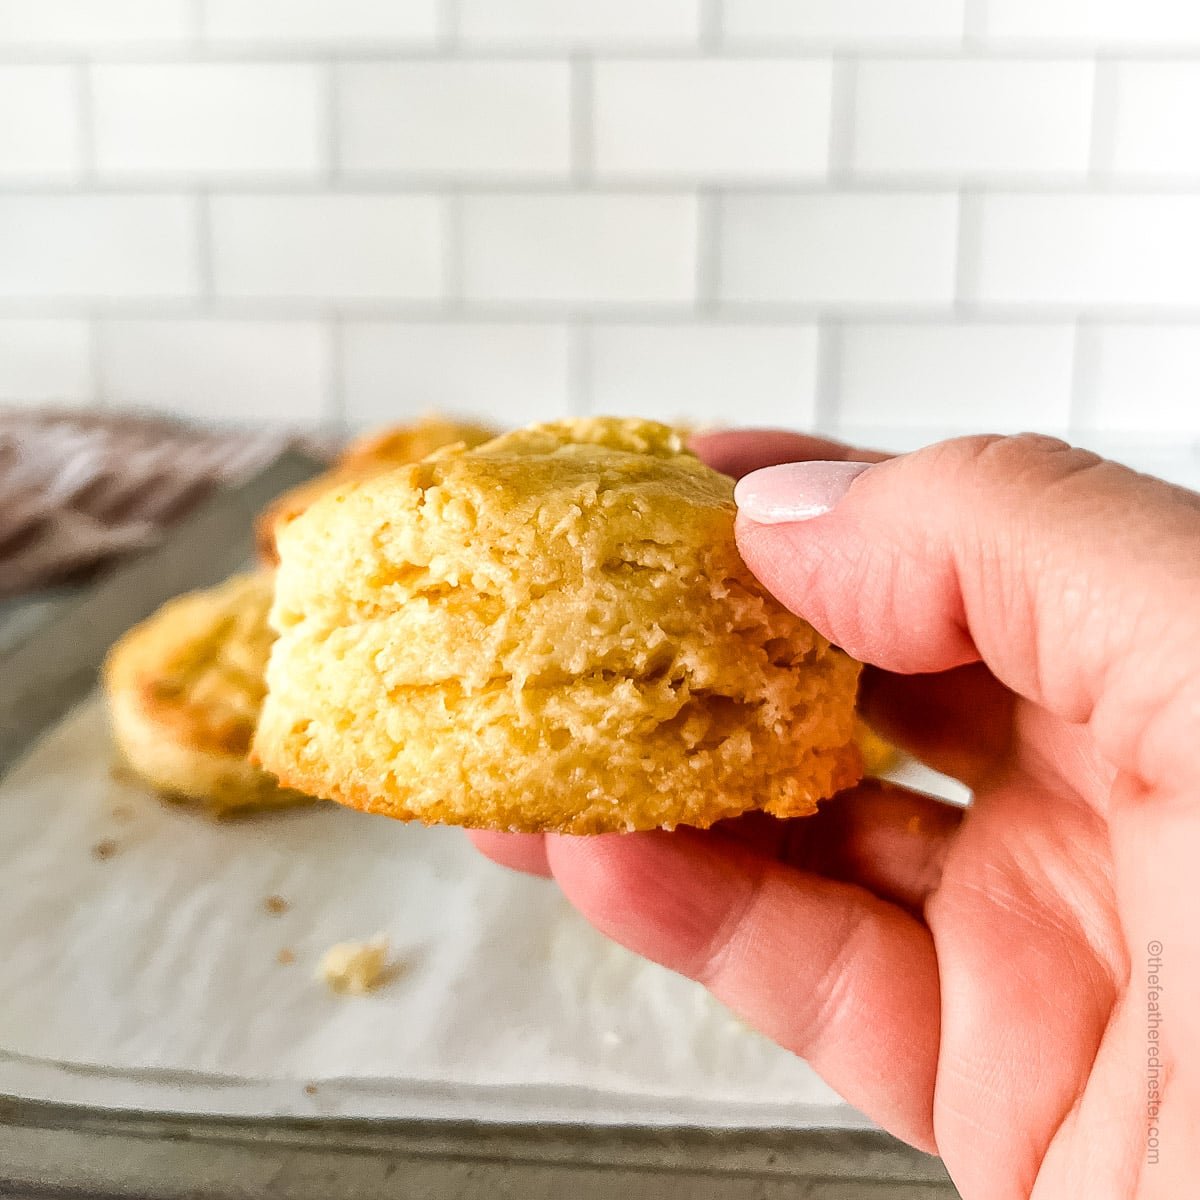 hand holding a buttermilk biscuit.